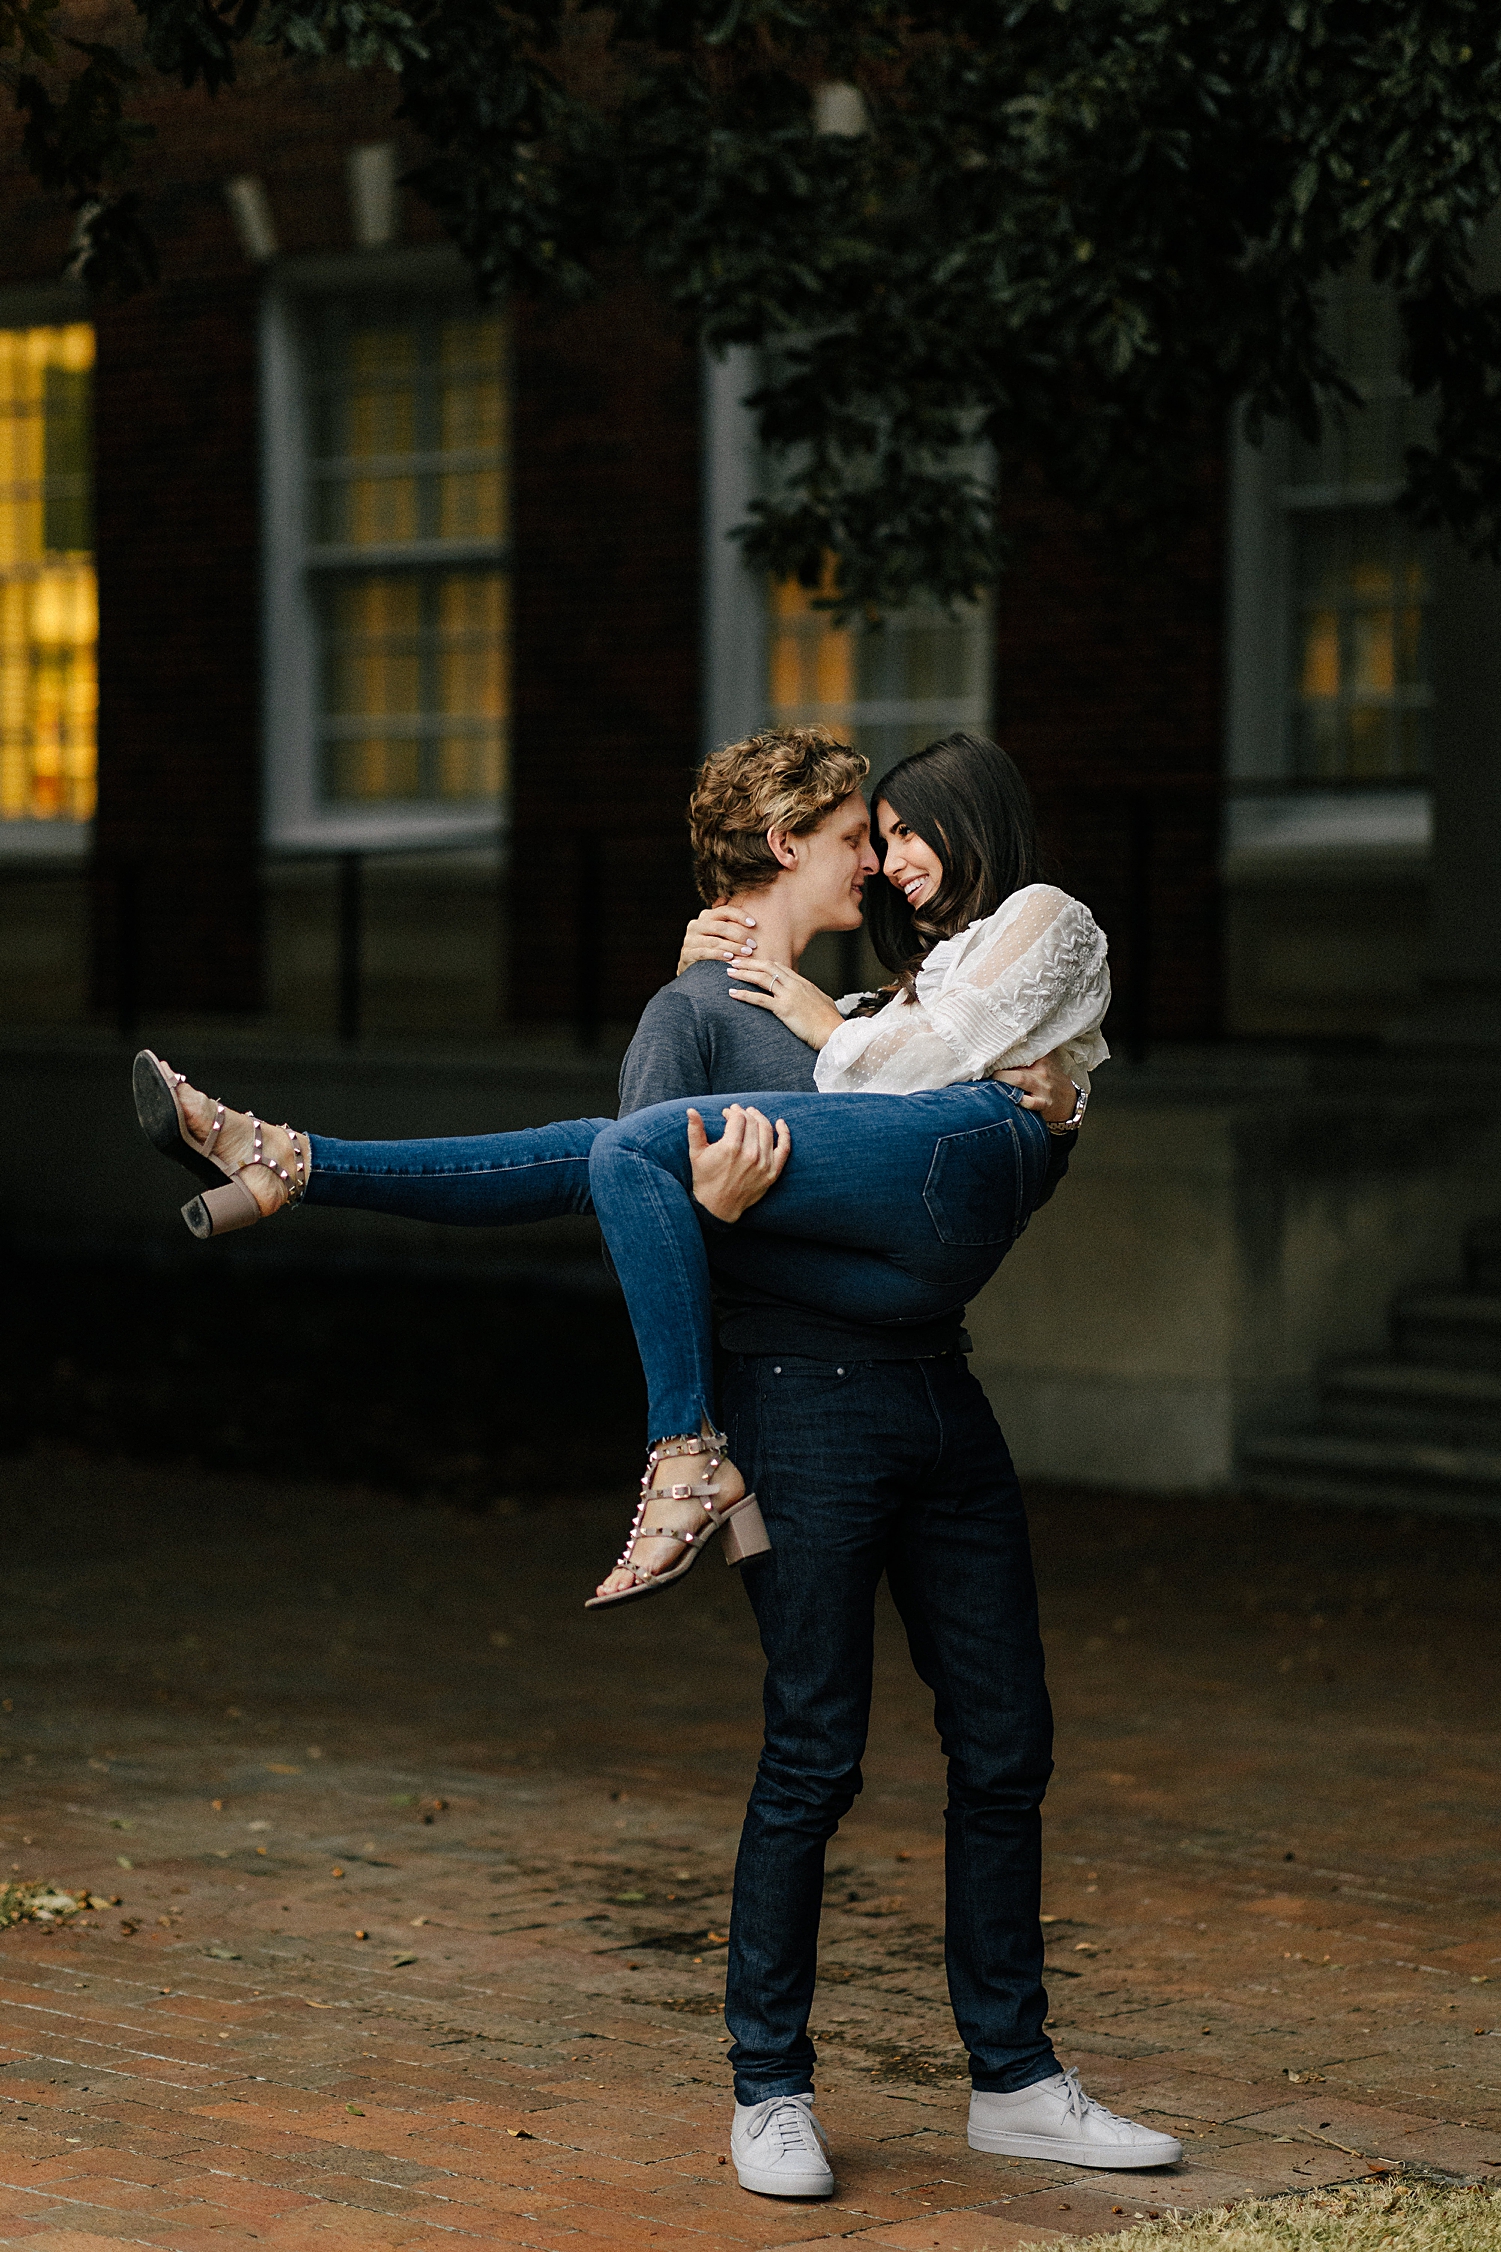 man holding girl in arms smiling with leg kicked out during engagement